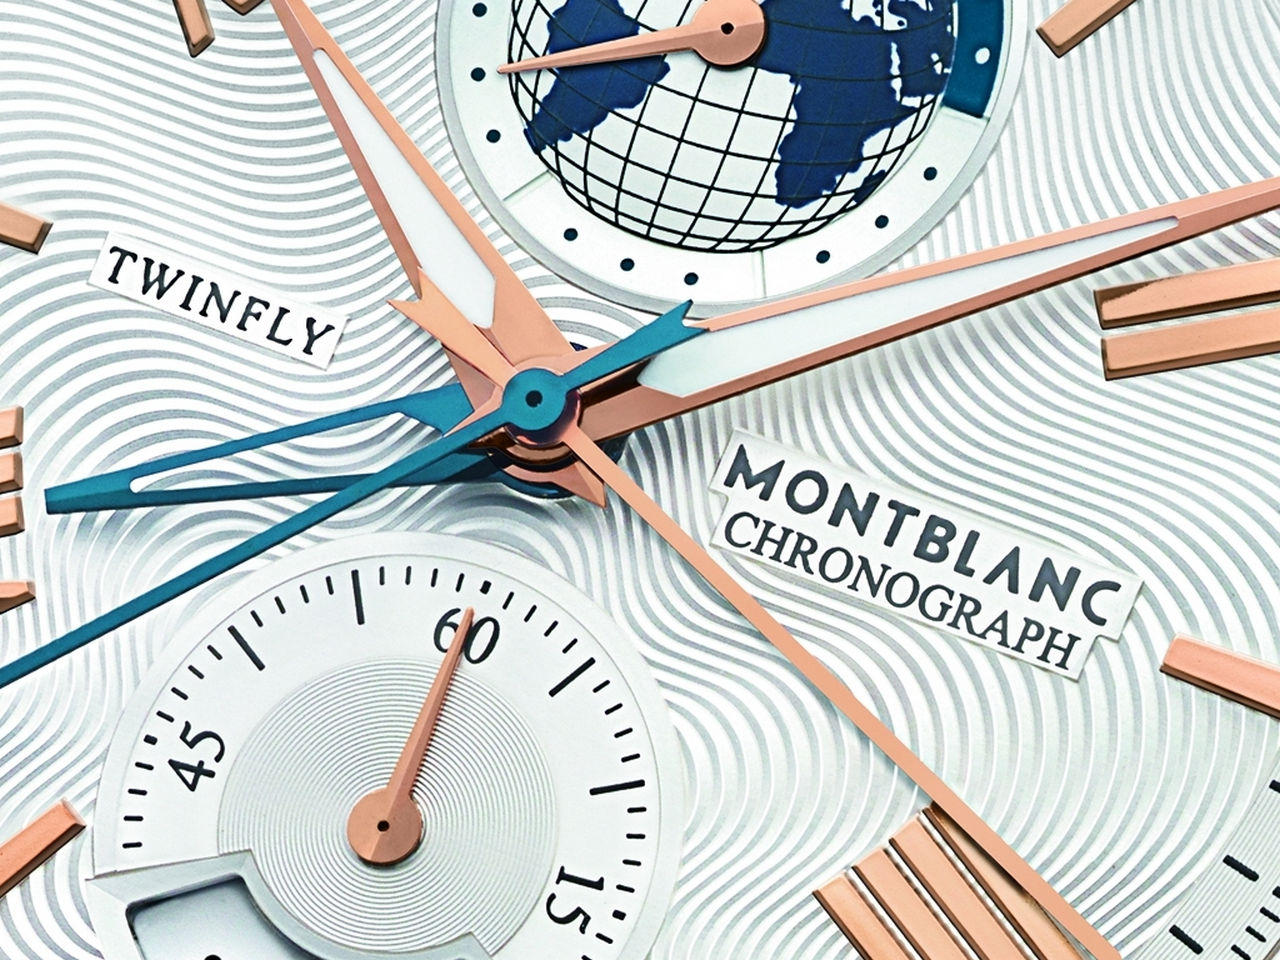 Montblanc-4810-TwinFly-Chronograph-110-Years-Edition-sihh-2016_0-100_3